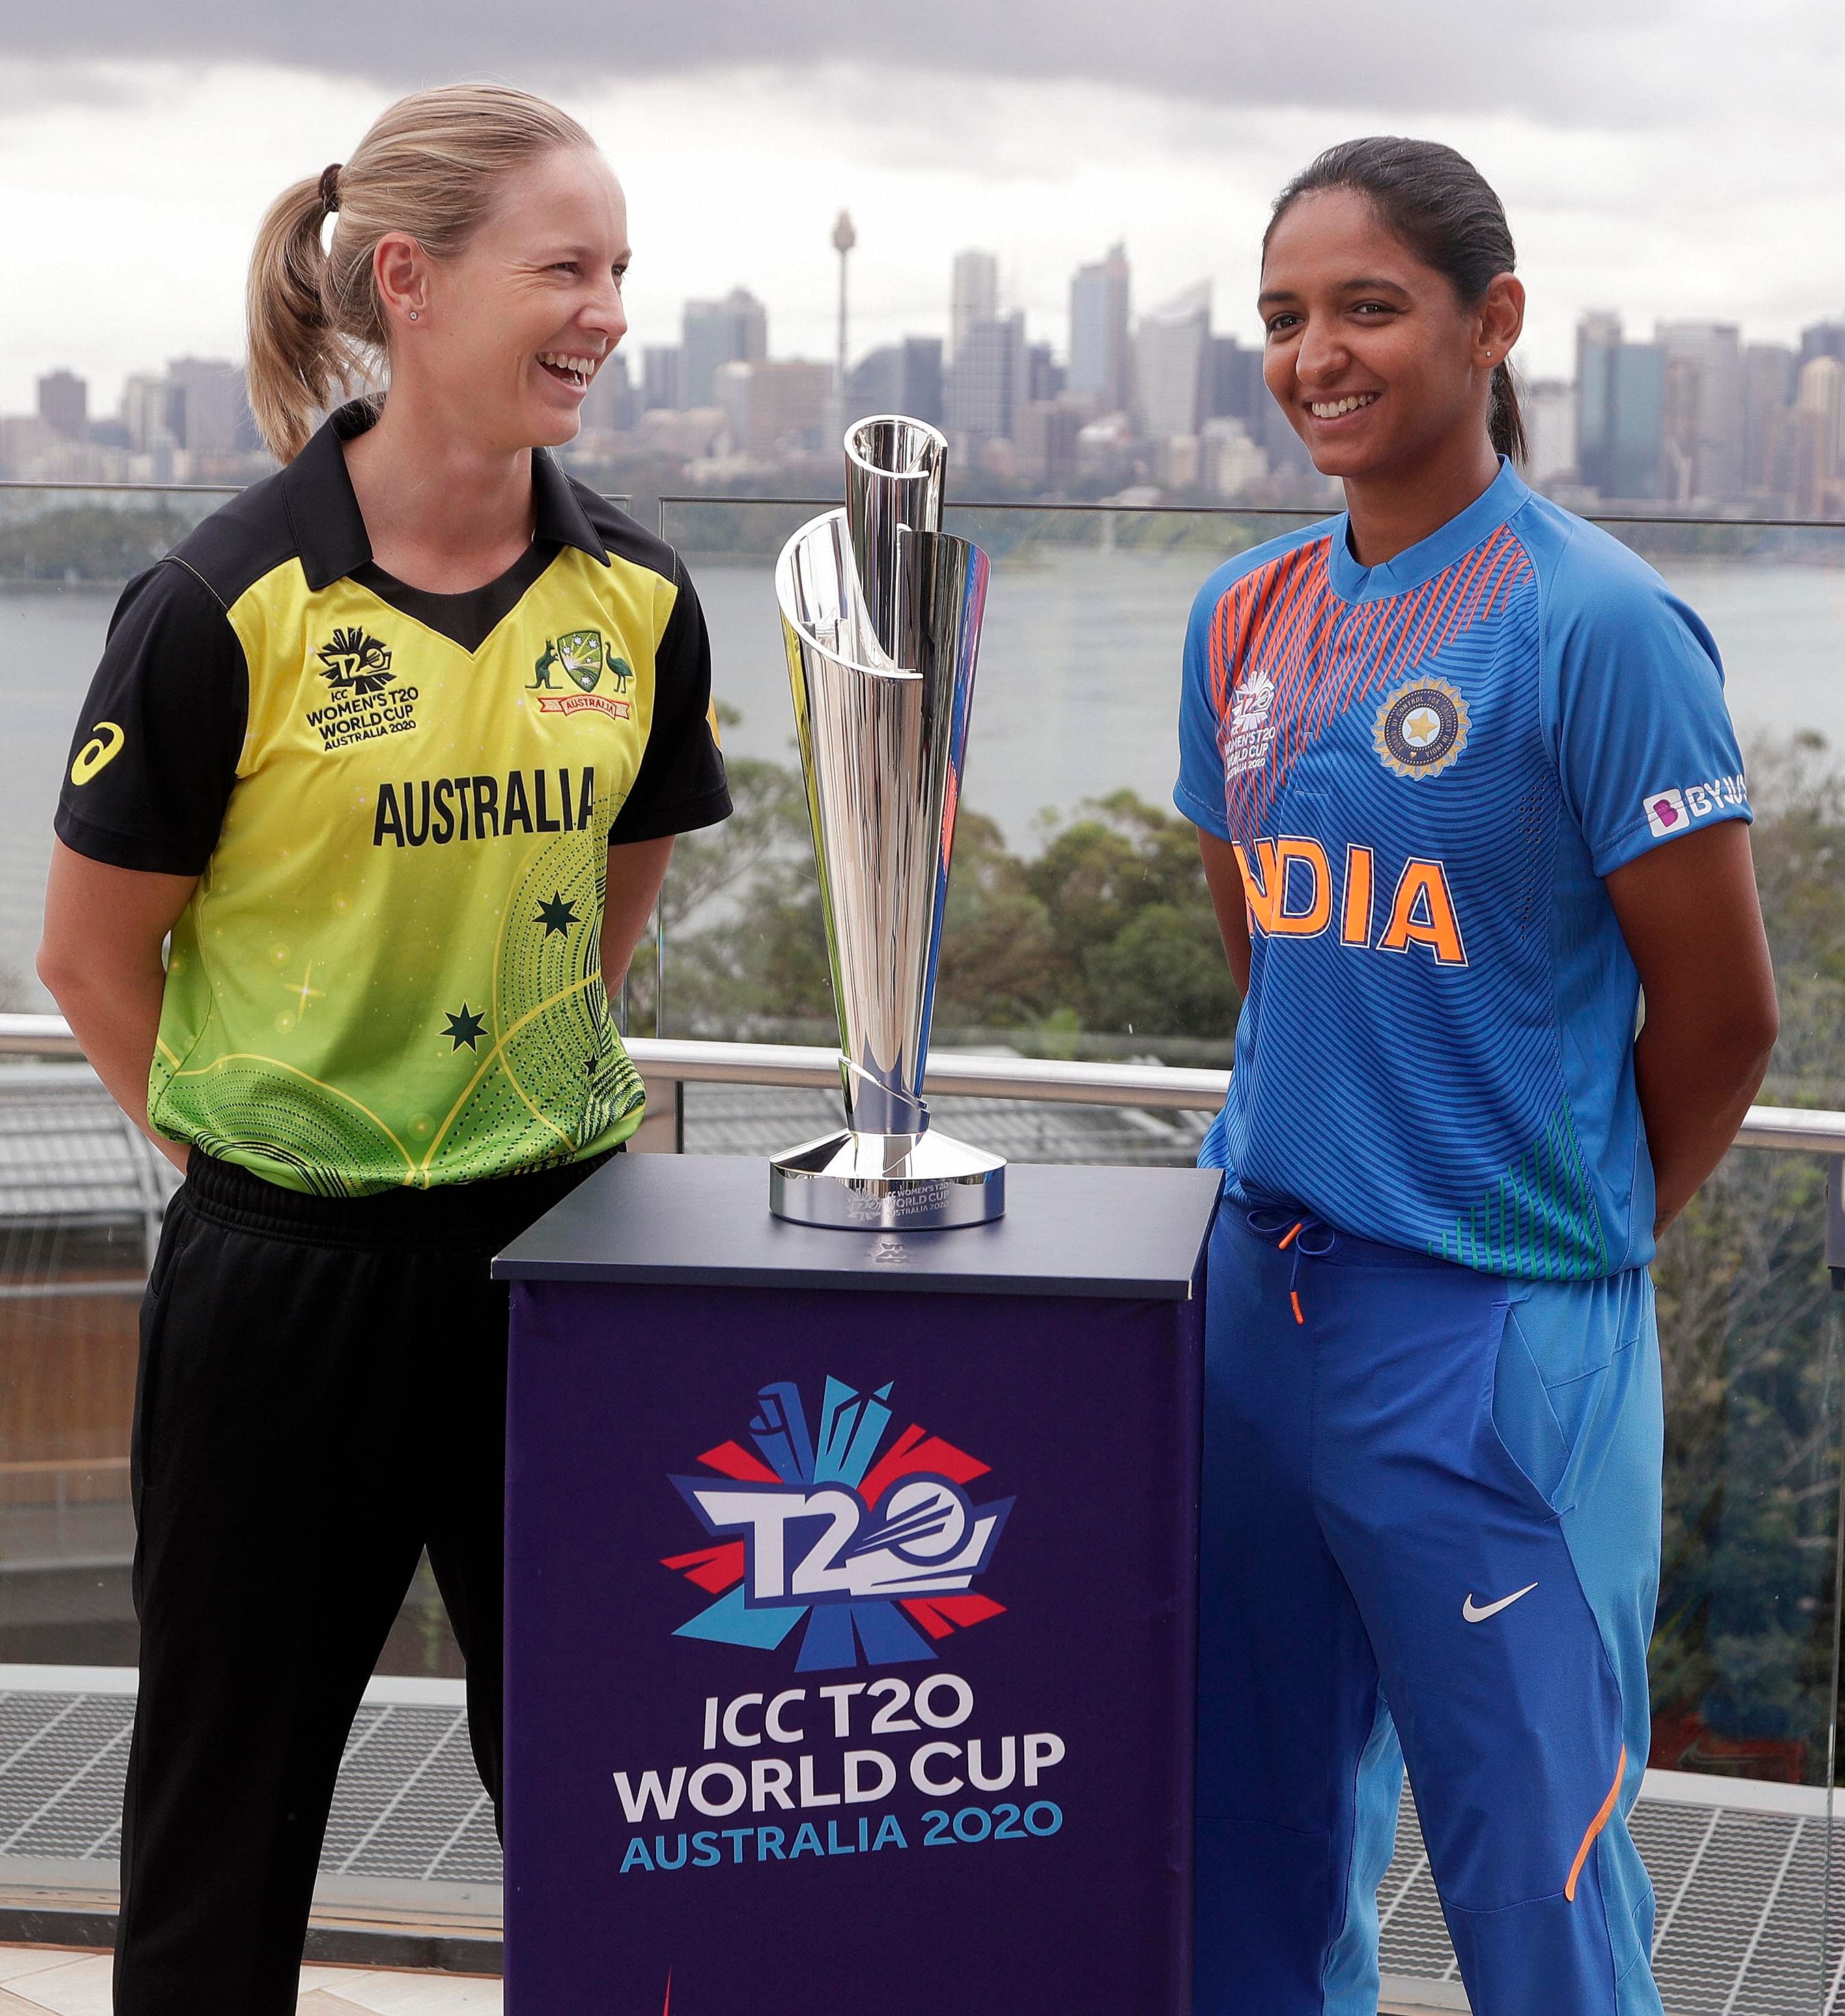 Cricket captains Meg Lanning of Australia, left, and Harmanpreet Kaur of India pose for a photo with the trophy ahead of the Women's T20 World Cup in Sydney. (Credit: AP Photo)